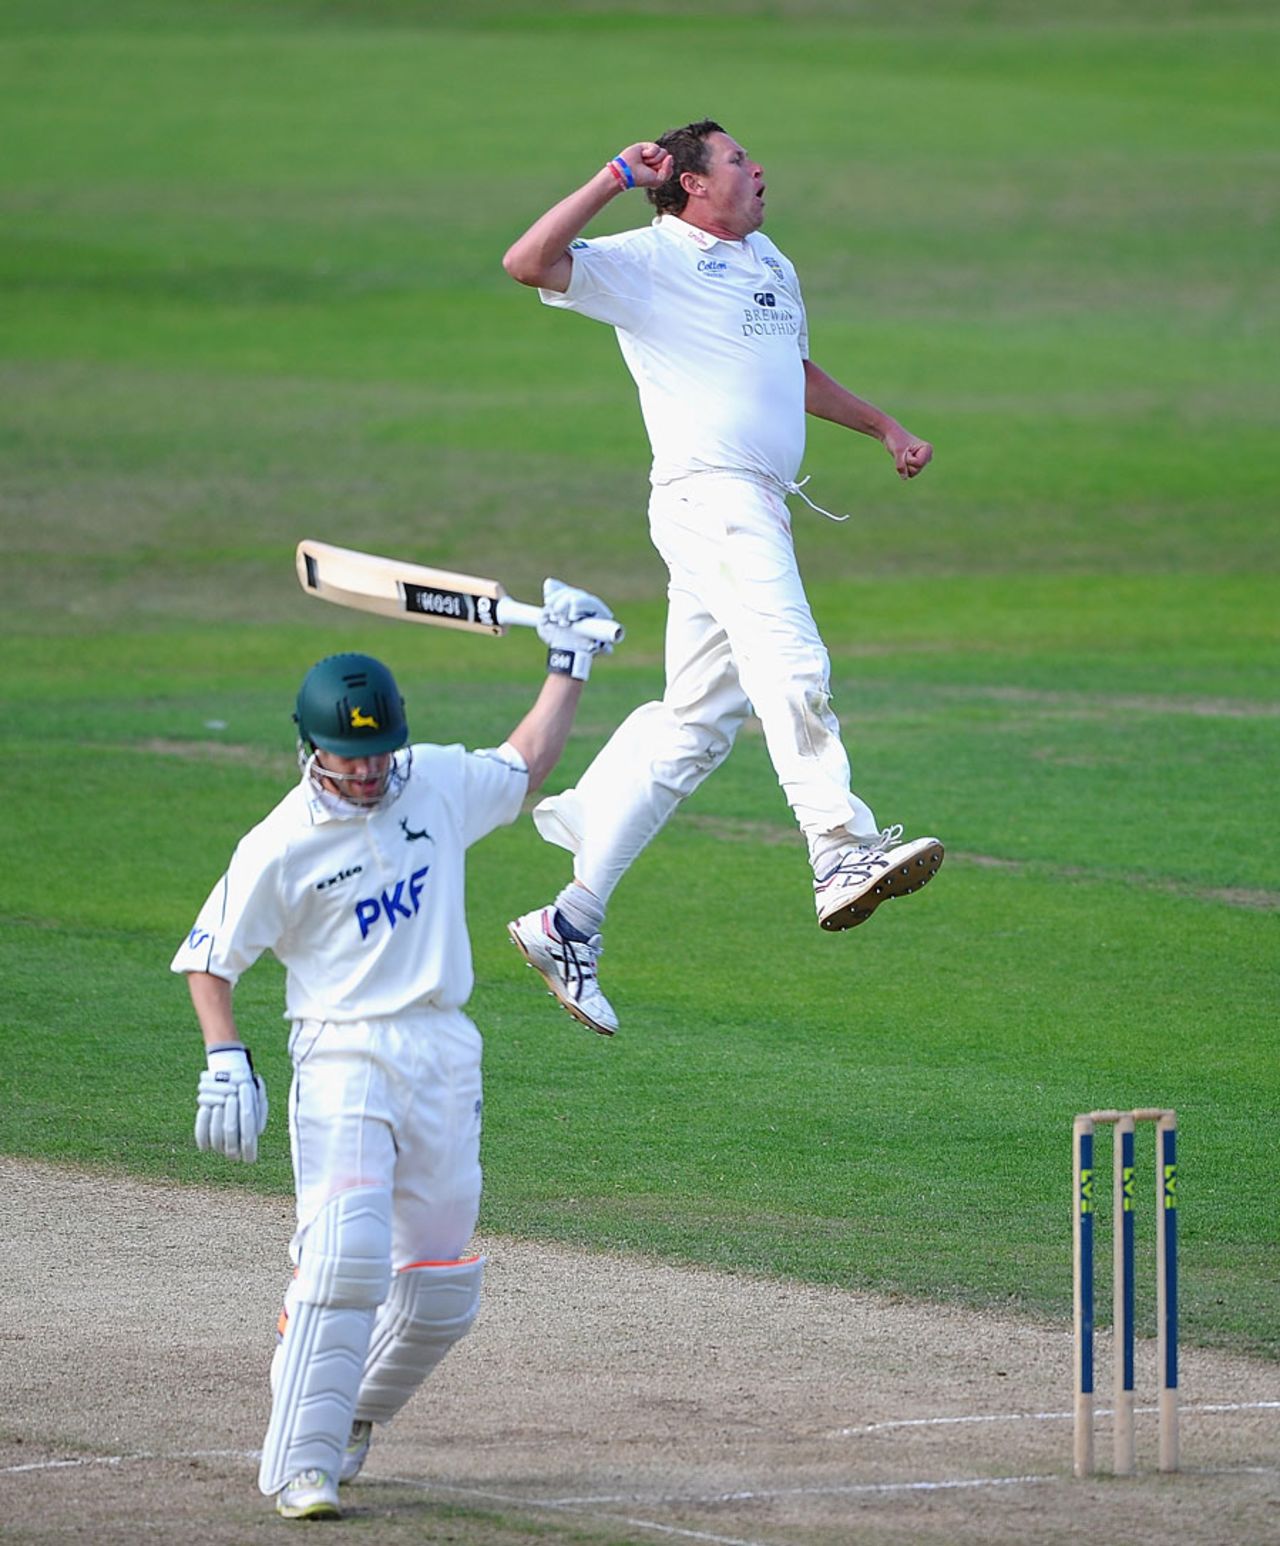 Mitchell Claydon took five wickets, including Chris Read, but Nottinghamshire held control , Nottinghamshire v Durham, County Championship Division One, 2nd day, Trent Bridge, August 22 2011